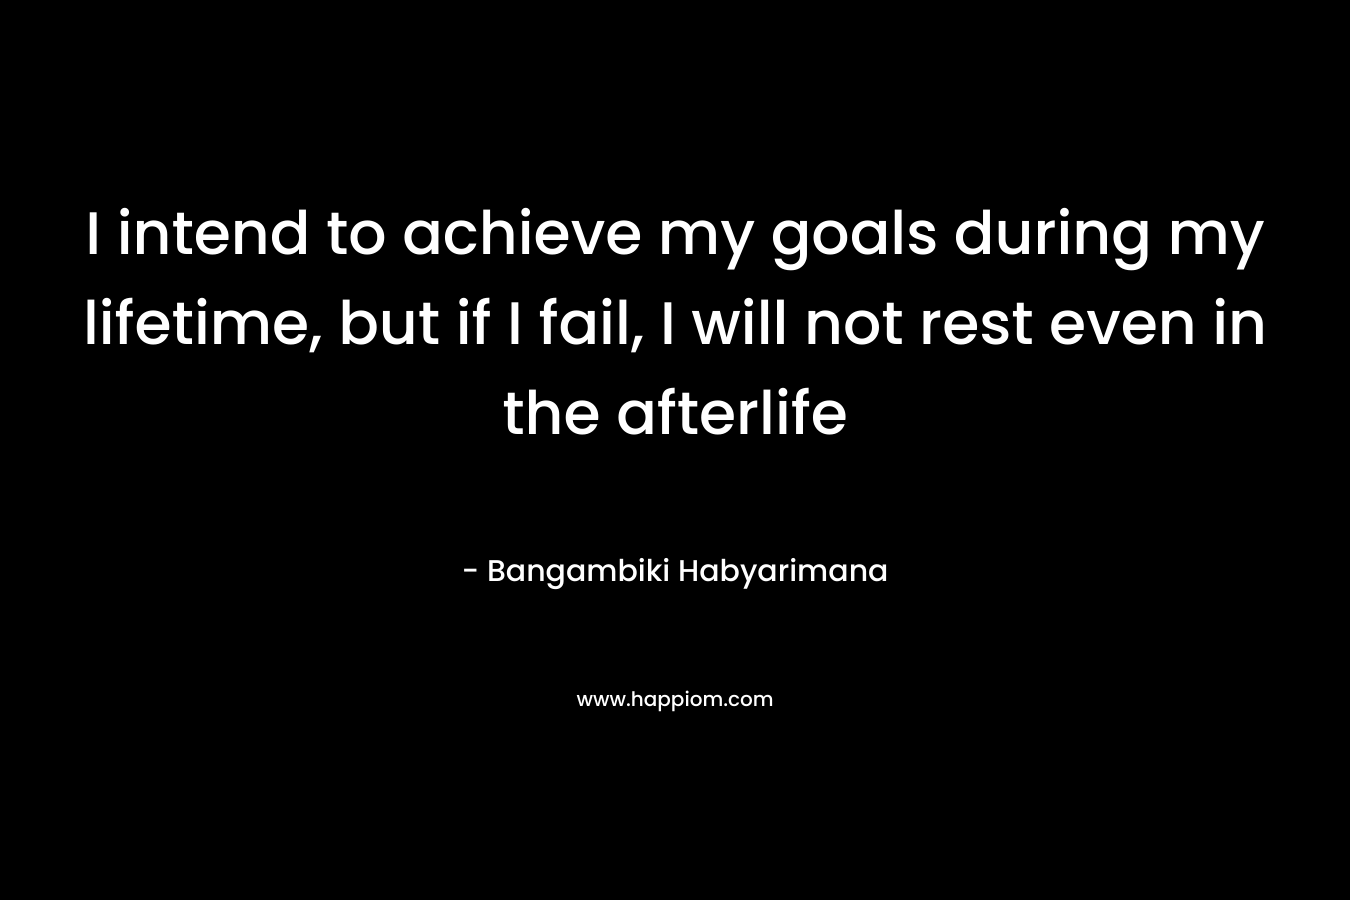 I intend to achieve my goals during my lifetime, but if I fail, I will not rest even in the afterlife